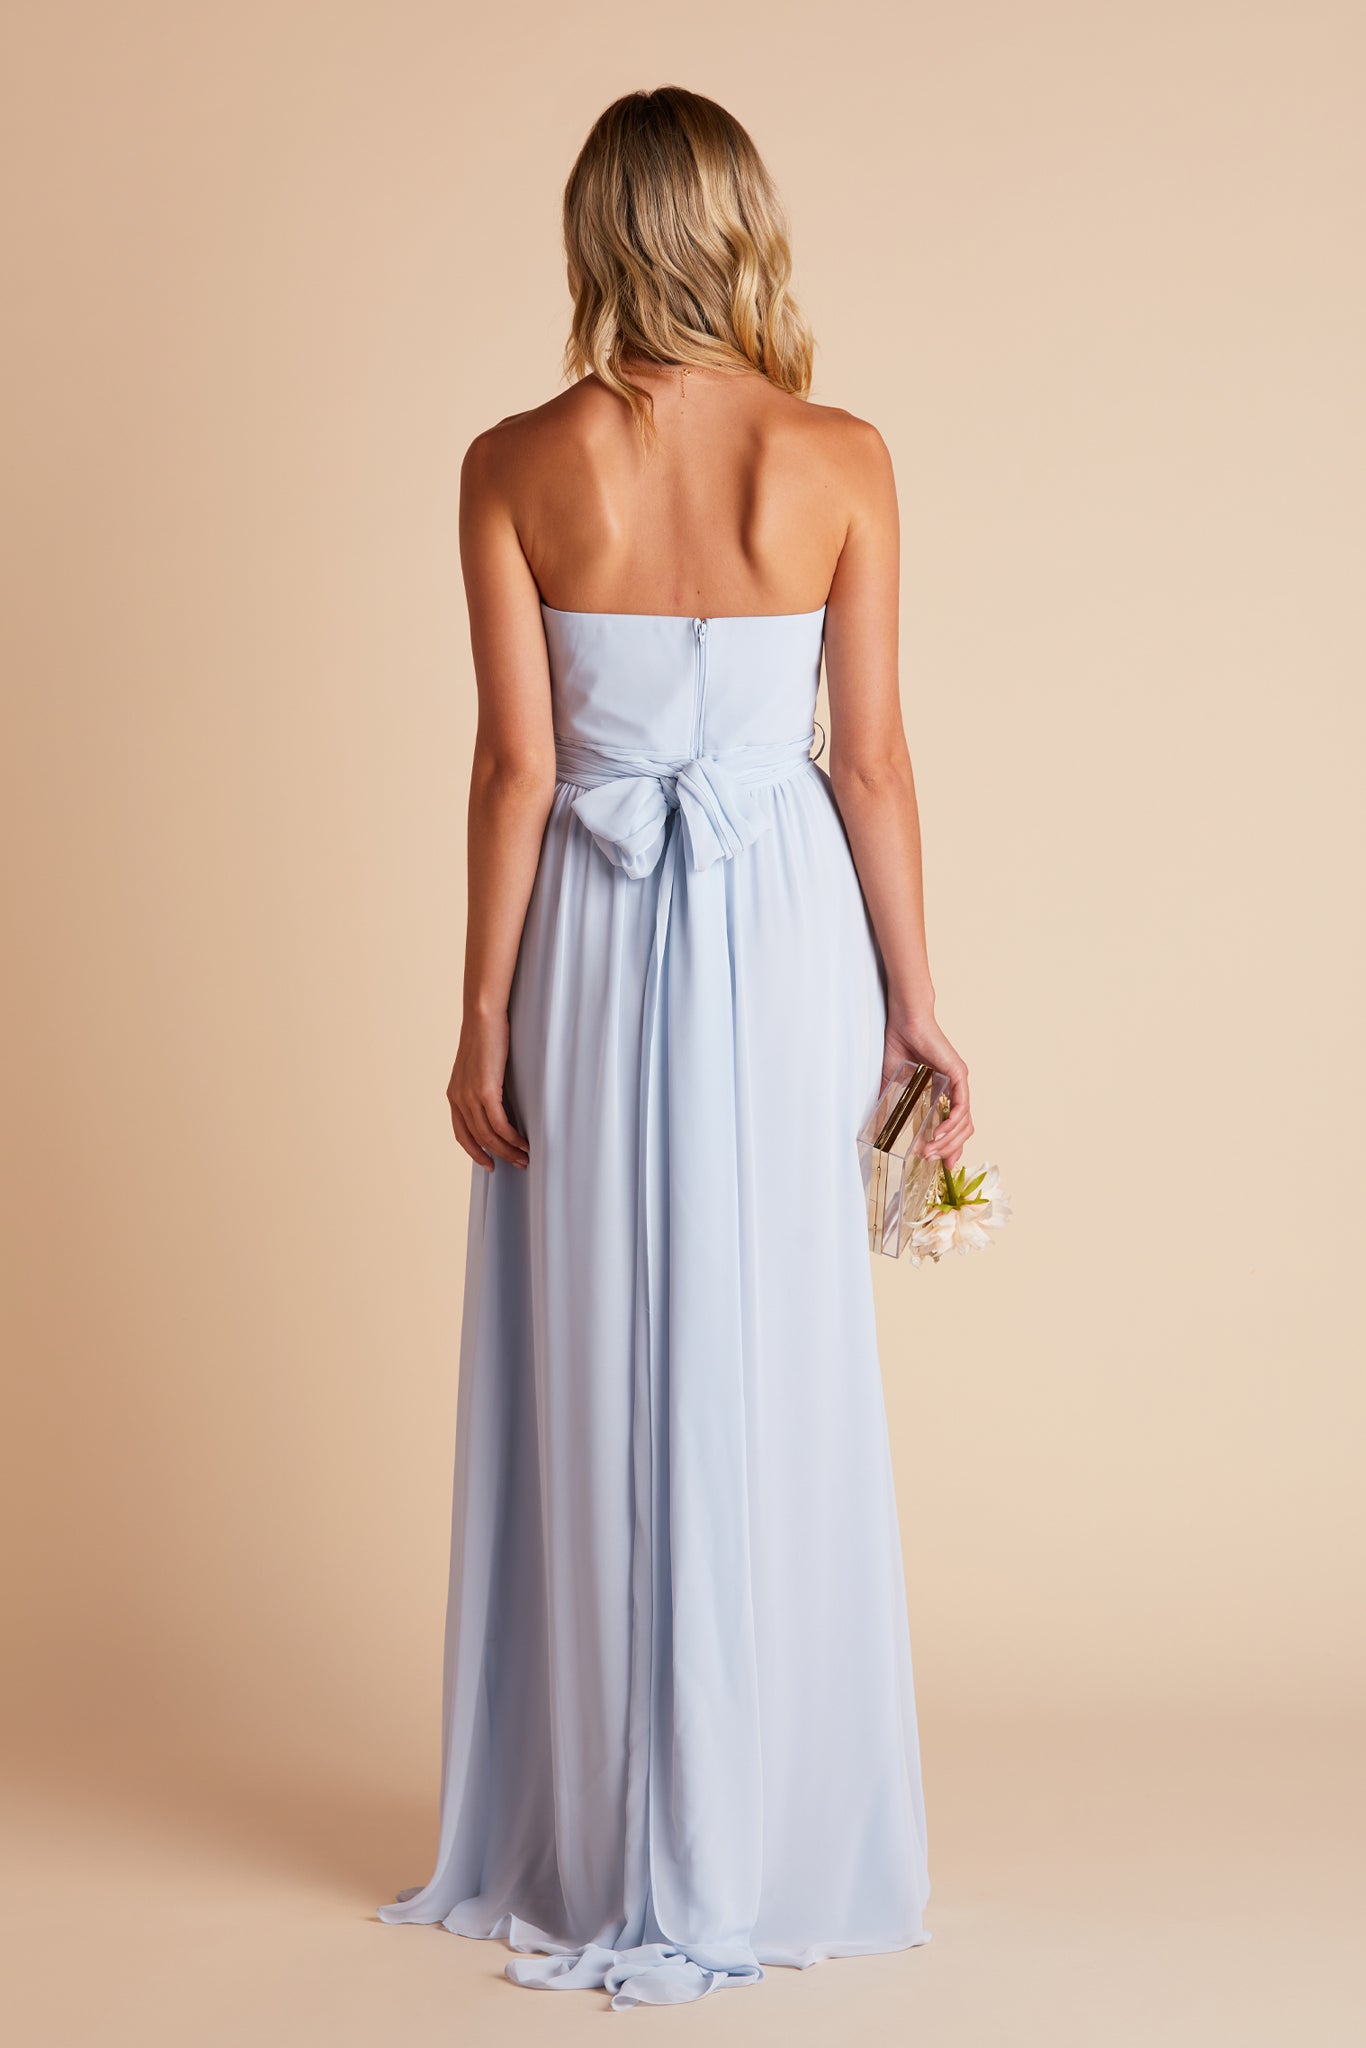 Grace convertible bridesmaid dress in ice blue chiffon by Birdy Grey, back view